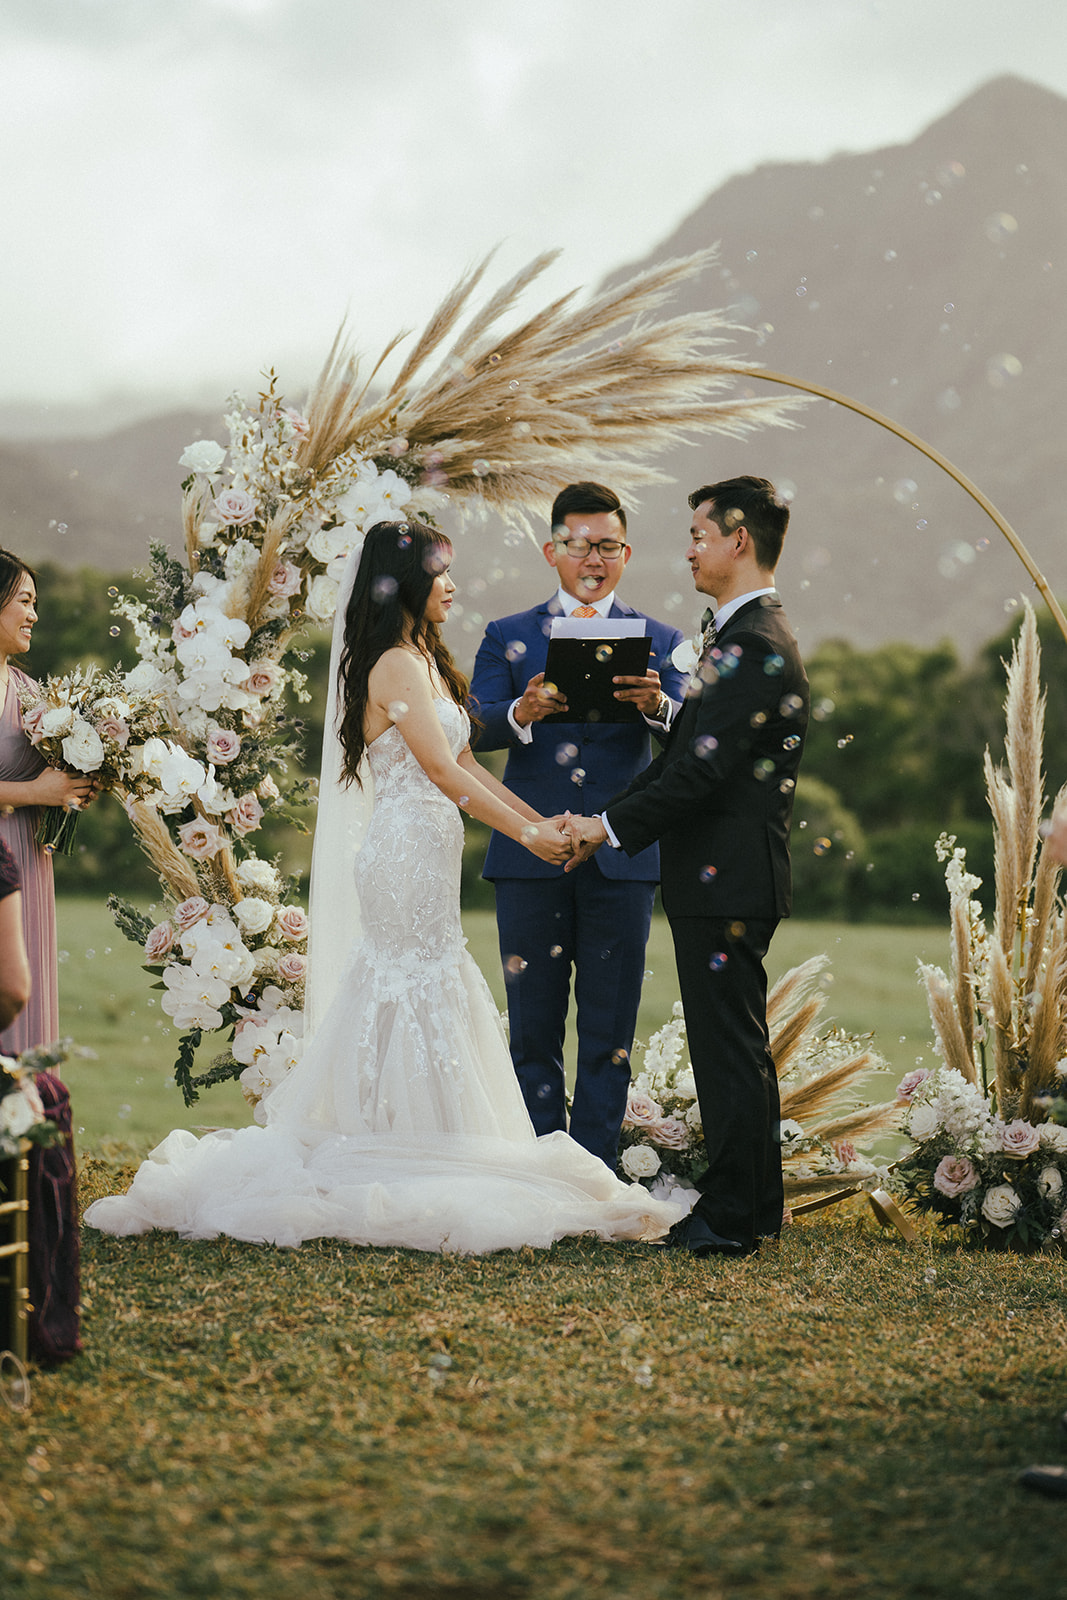 Bride and groom just got hitched at Wedding ceremony in Kualoa Ranch Hawaii